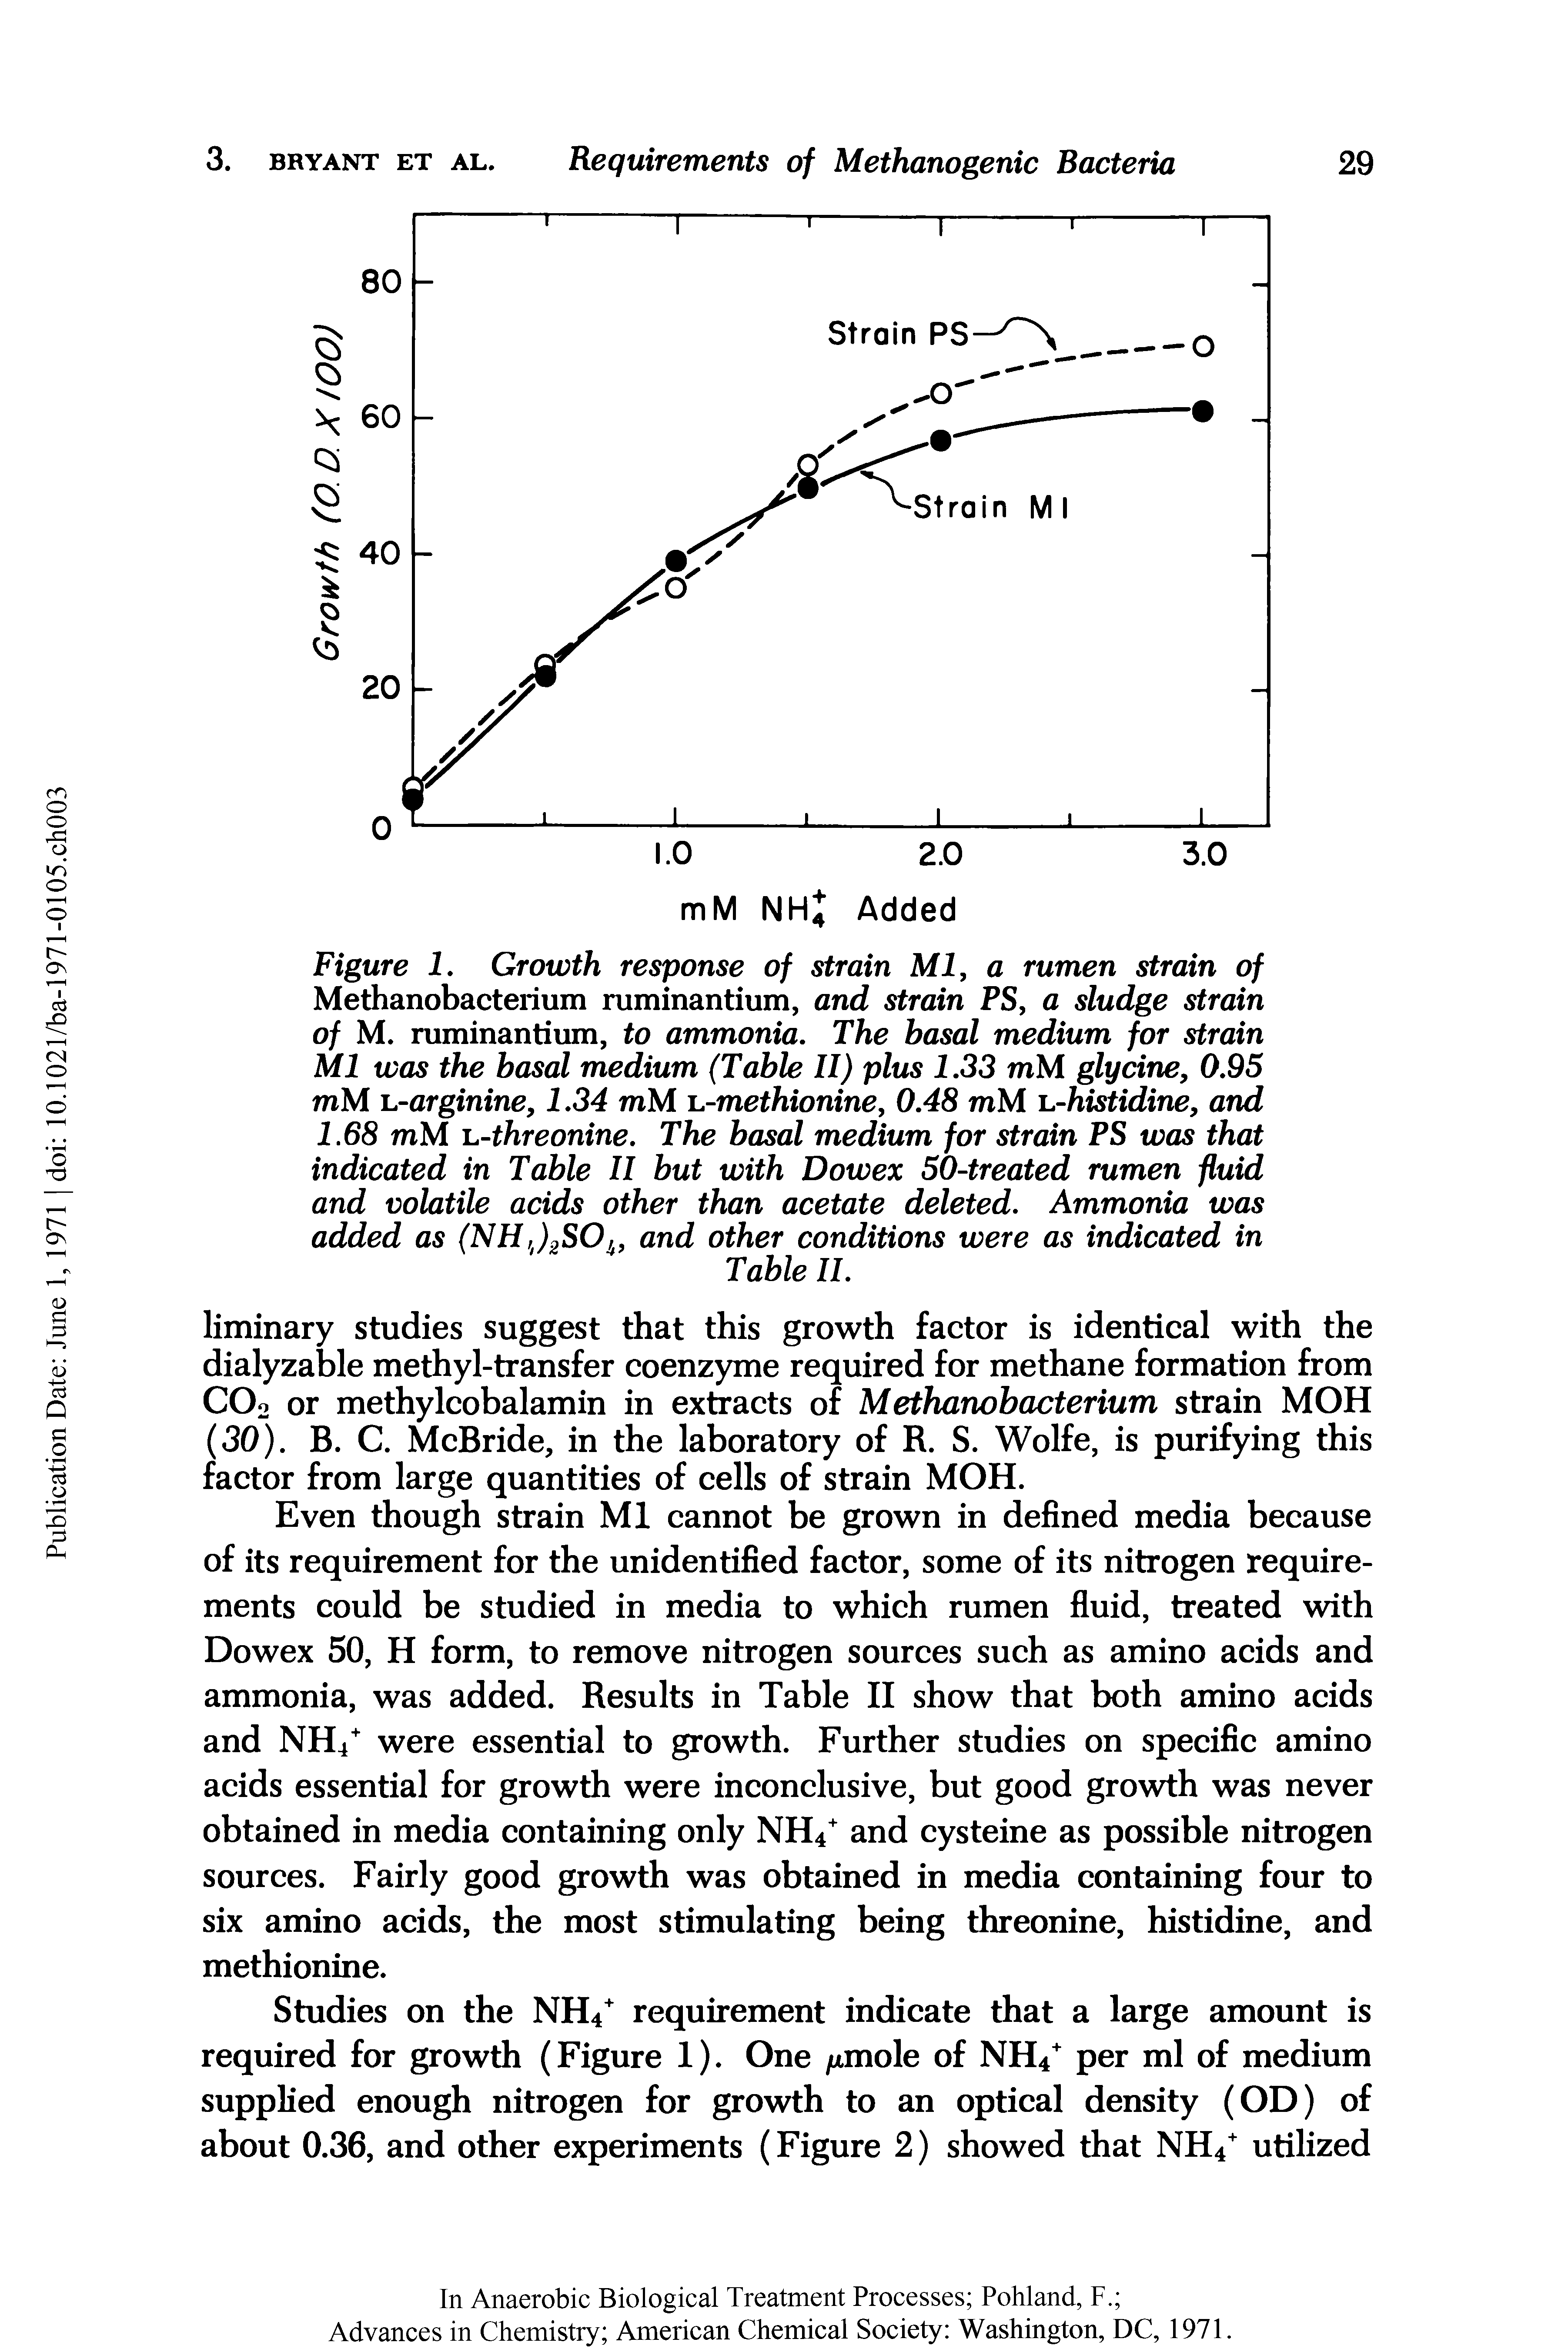 Figure J. Growth response of strain Ml, a rumen strain of Methanobacterium ruminantium, and strain PS, a sludge strain of M. ruminantium, to ammonia. The basal medium for strain Ml was the basal medium (Table II) plus 1.33 mM glycine, 0.95 mM i.-arginine, 1.34 mM la-methionine, 0.48 mM i.-histidine, and 1.68 mM la-threonine. The basal medium for strain PS was that indicated in Table II but with Dowex 50-treated rumen fluid and volatile acids other than acetate deleted. Ammonia was added as (NHi SOf, and other conditions were as indicated in...